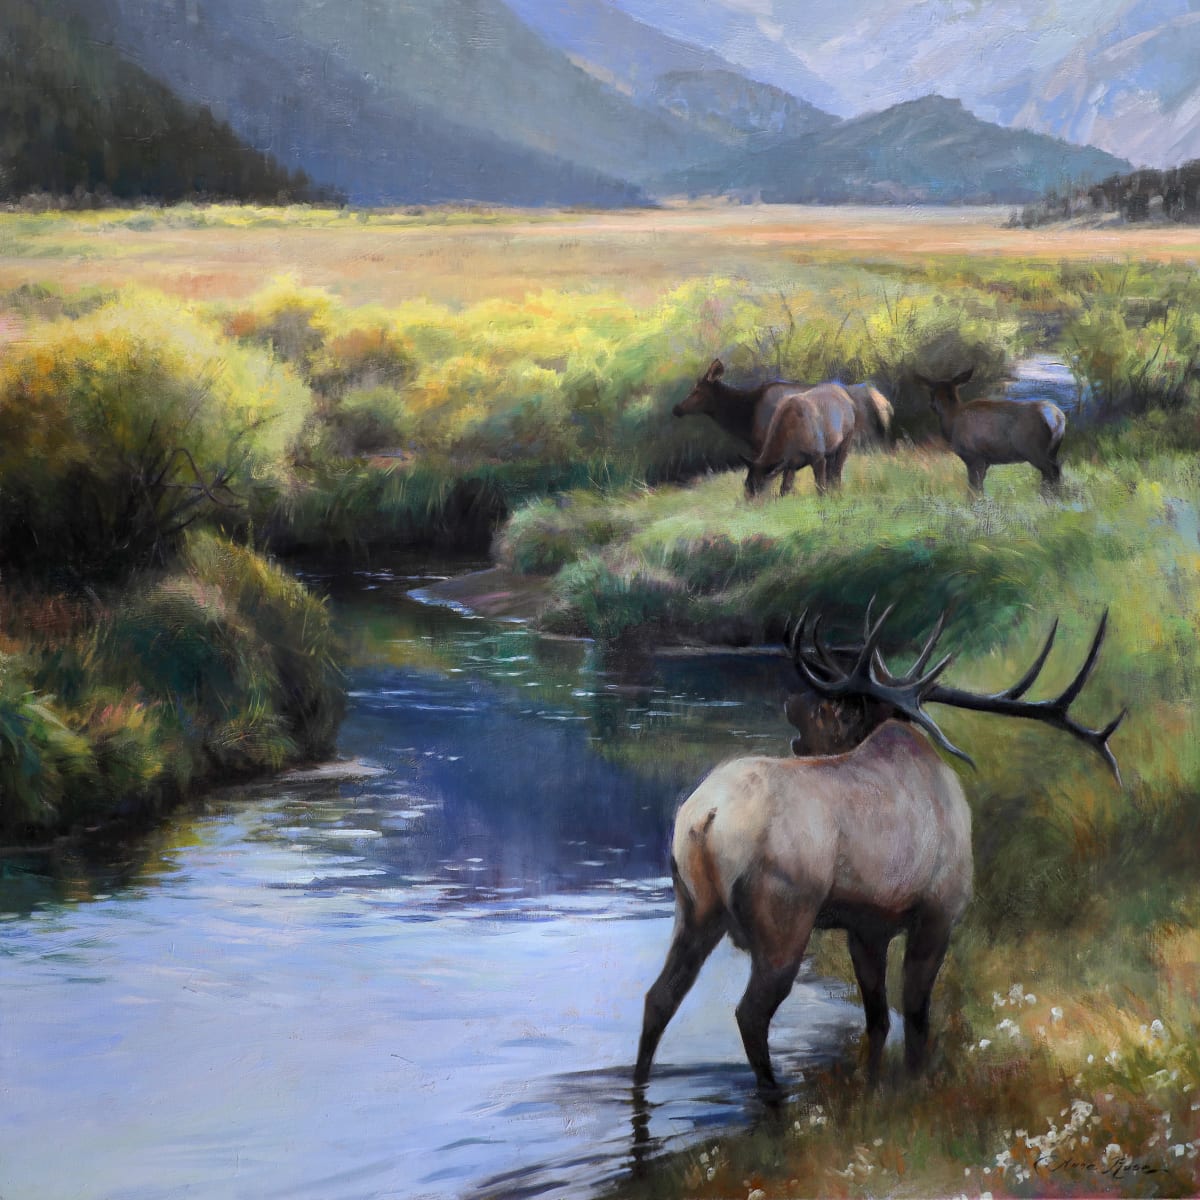 Moraine Valley Elk by Anna Rose Bain  Image: "Moraine Valley Elk," 30x30 inches, oil on panel